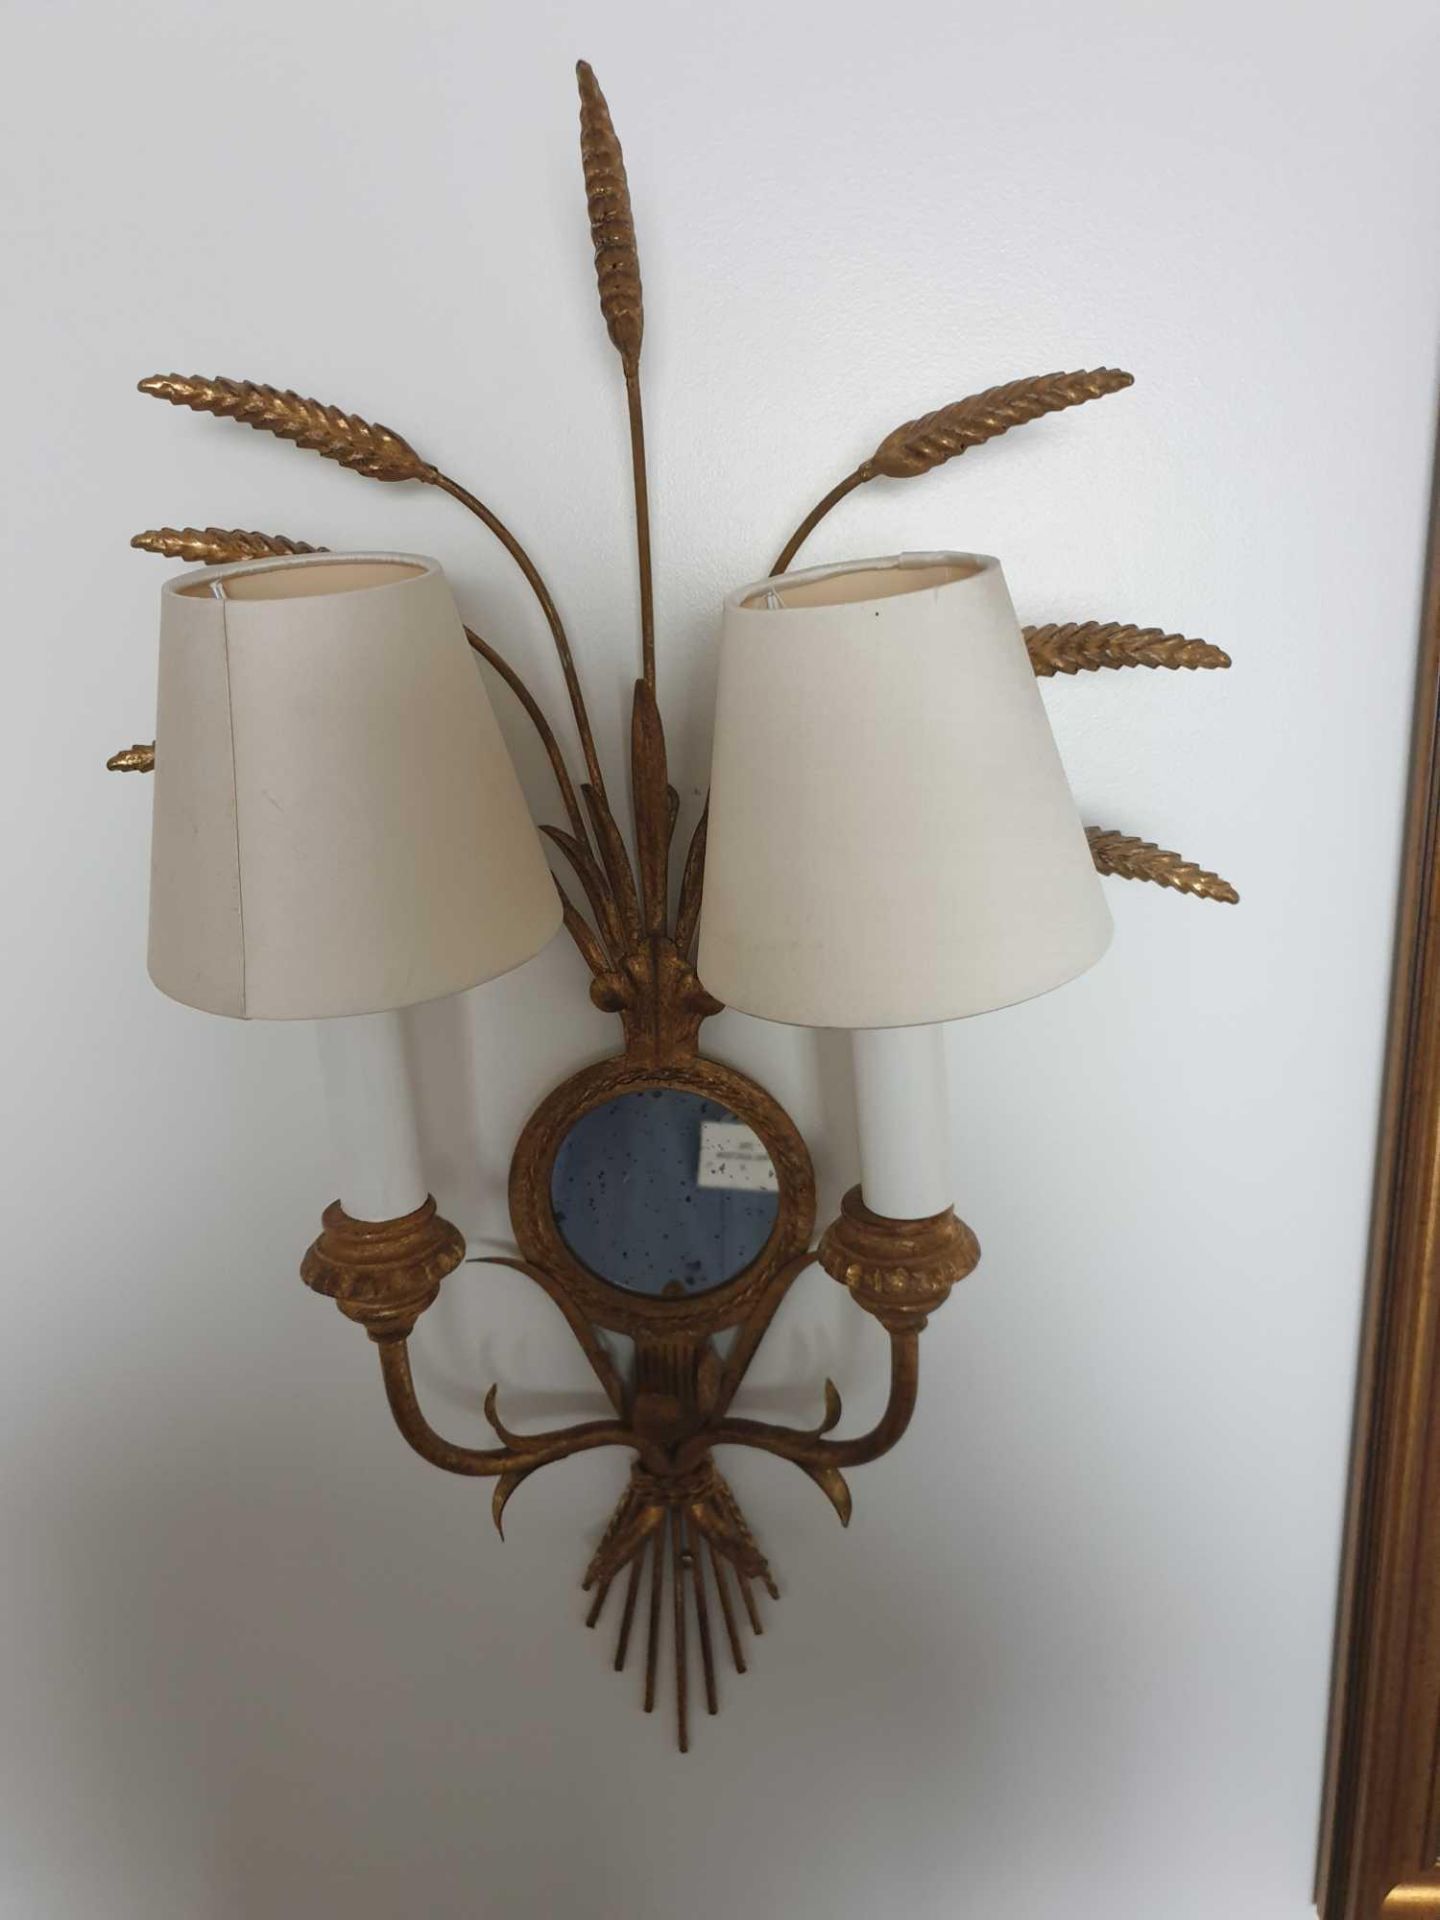 A Pair Of Wall Appliques Twin Arm In A Elegant Wheatsheaf Motif And A Small Decorative Mirror - Image 2 of 2